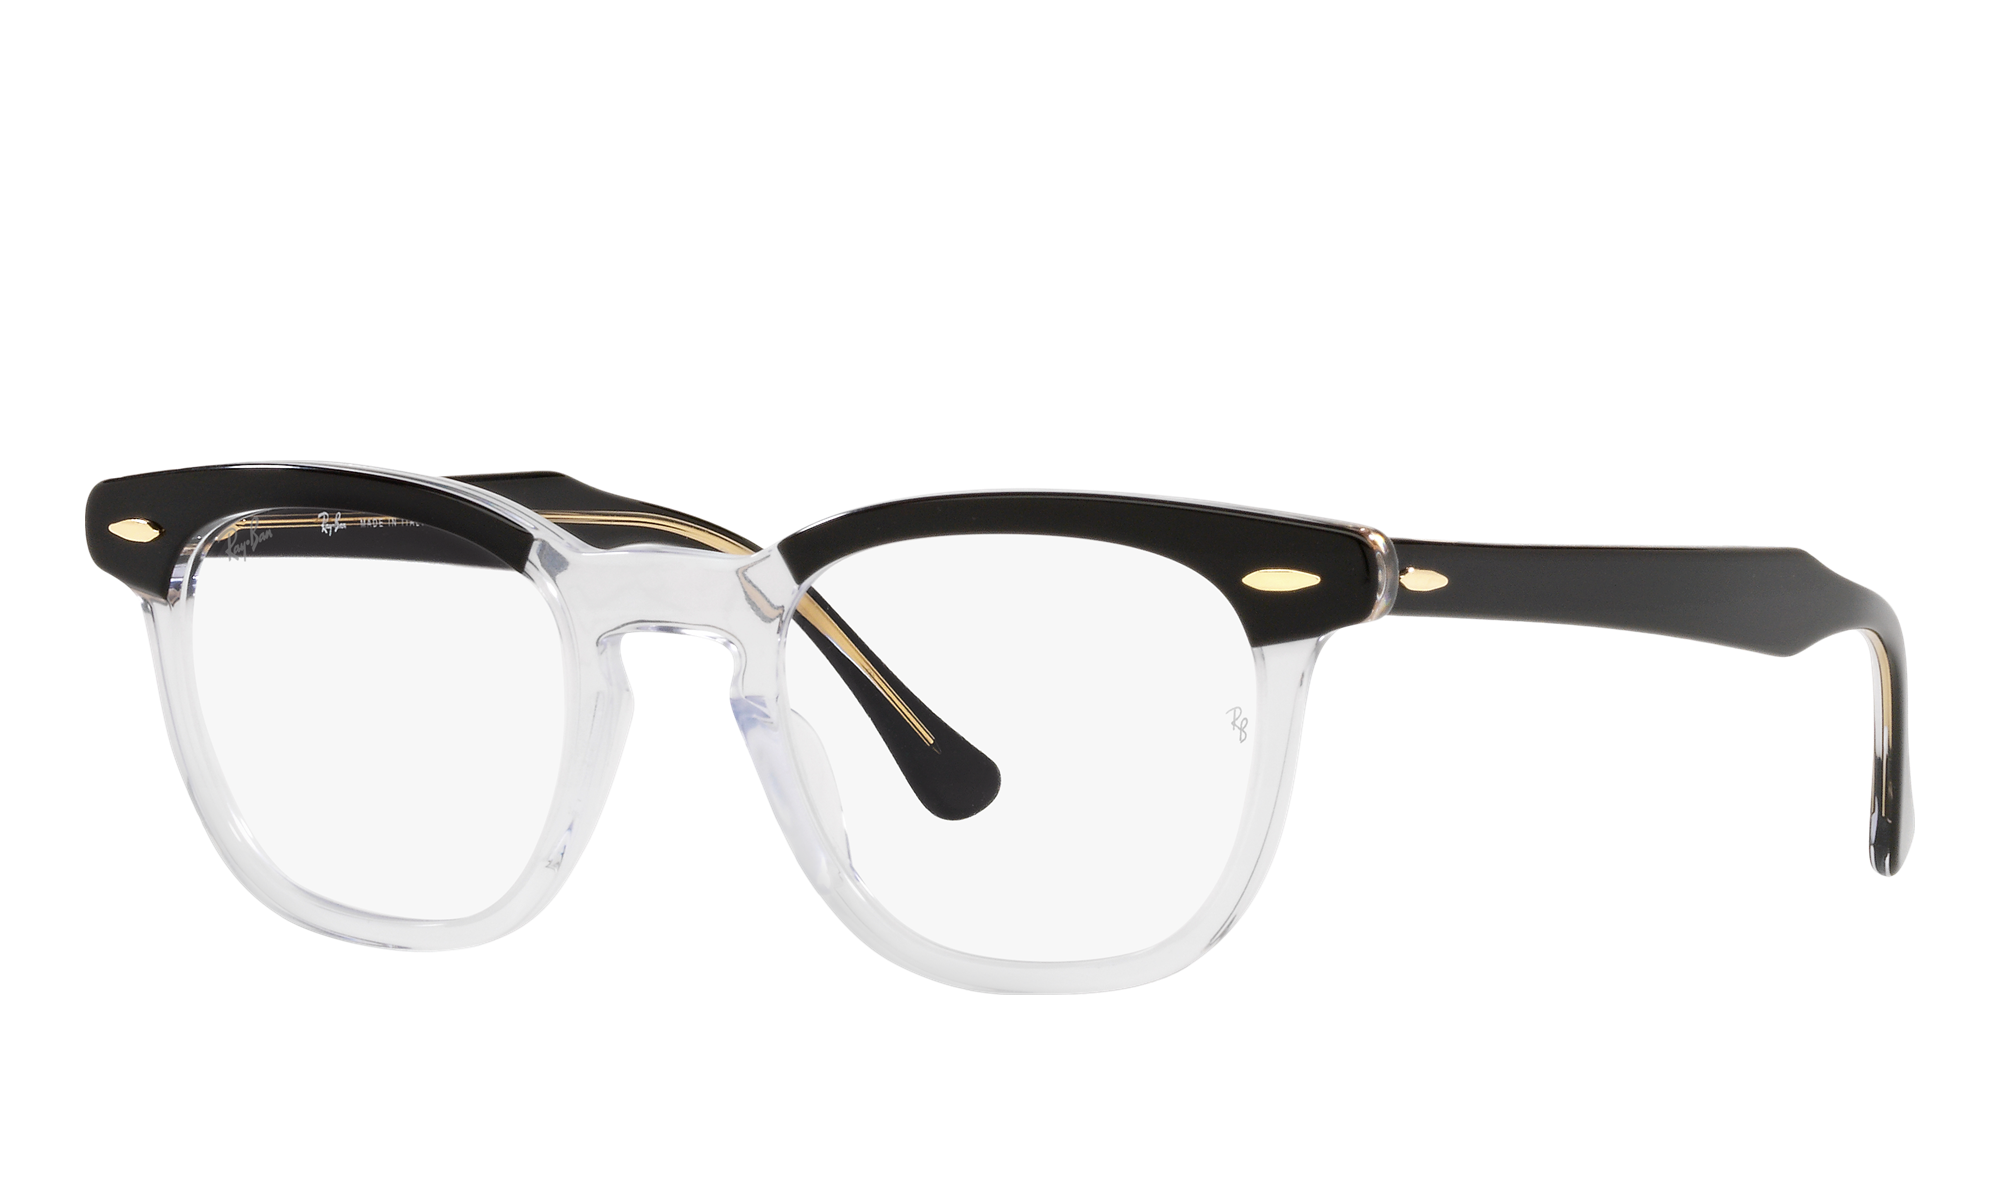 Ray-Ban Unisex Rx5398 Black On Transparent Size: Small